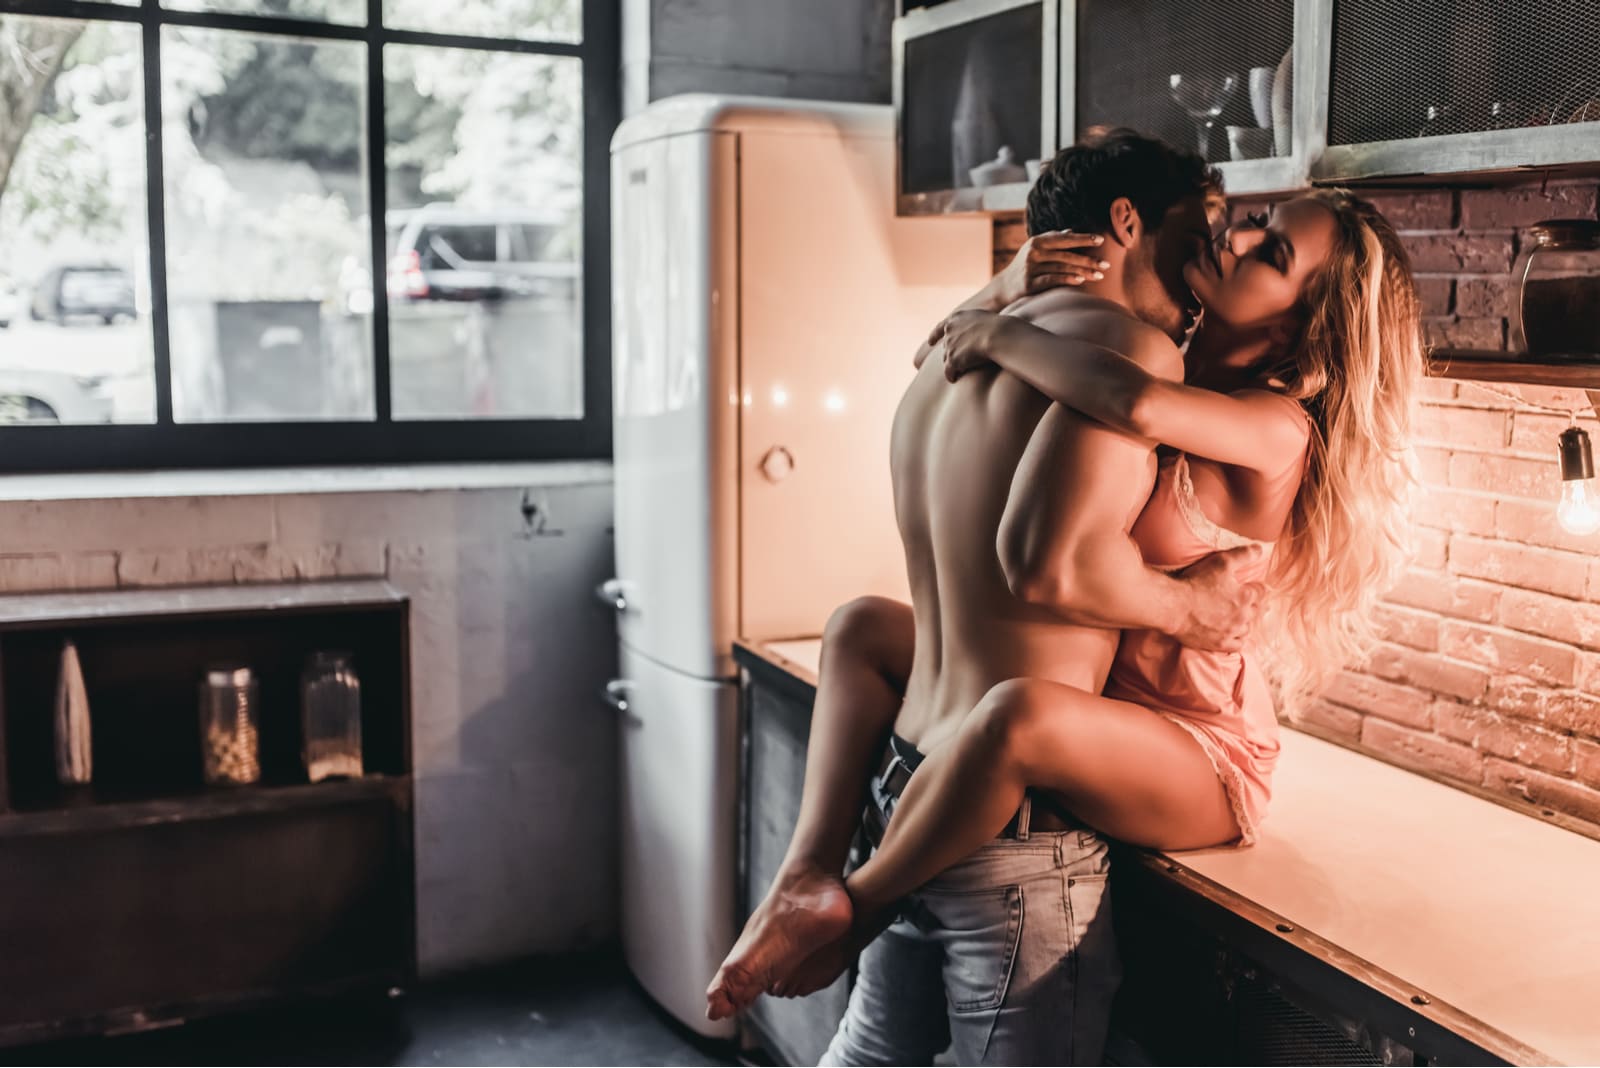 the man put the woman in the kitchen and kissed her